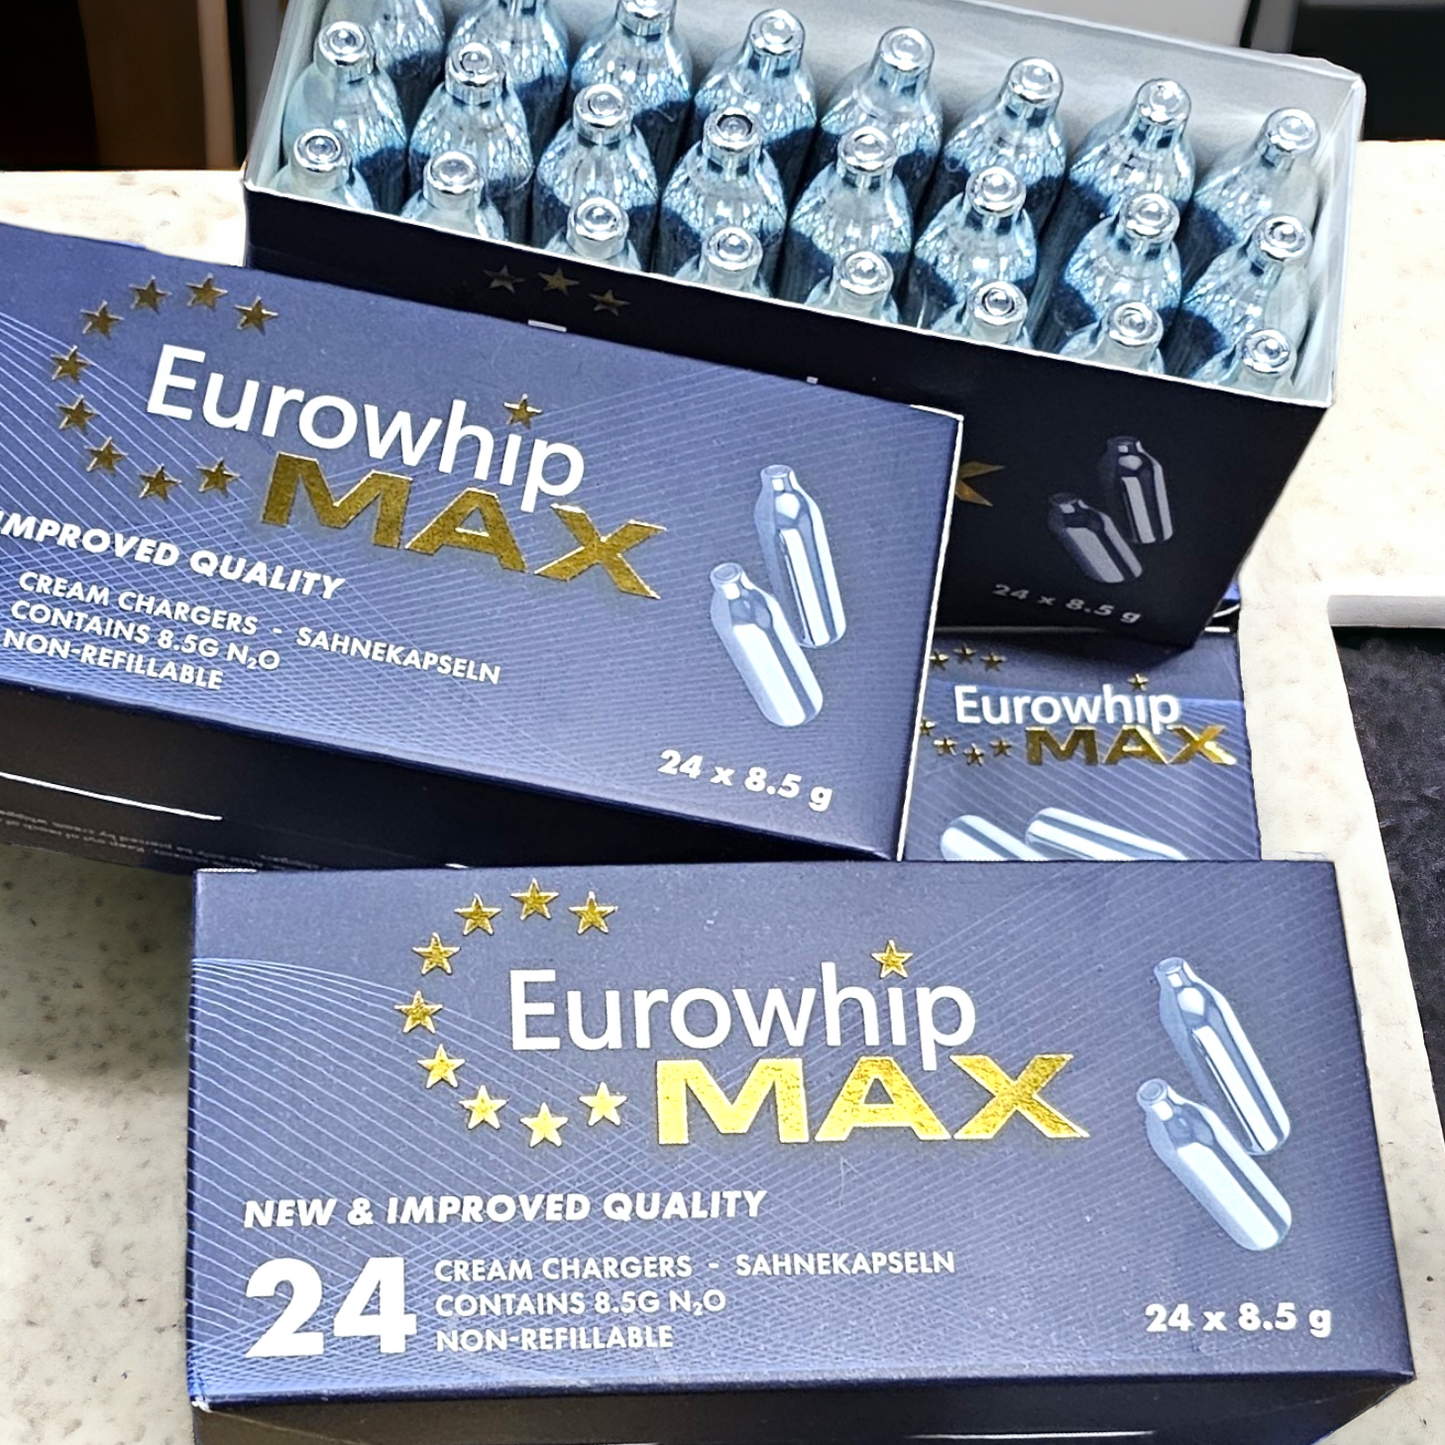 480 st lustgas patroner 20x24-pack eurowhip Max. The Cream chargers are placed on a kitchen table of marble.